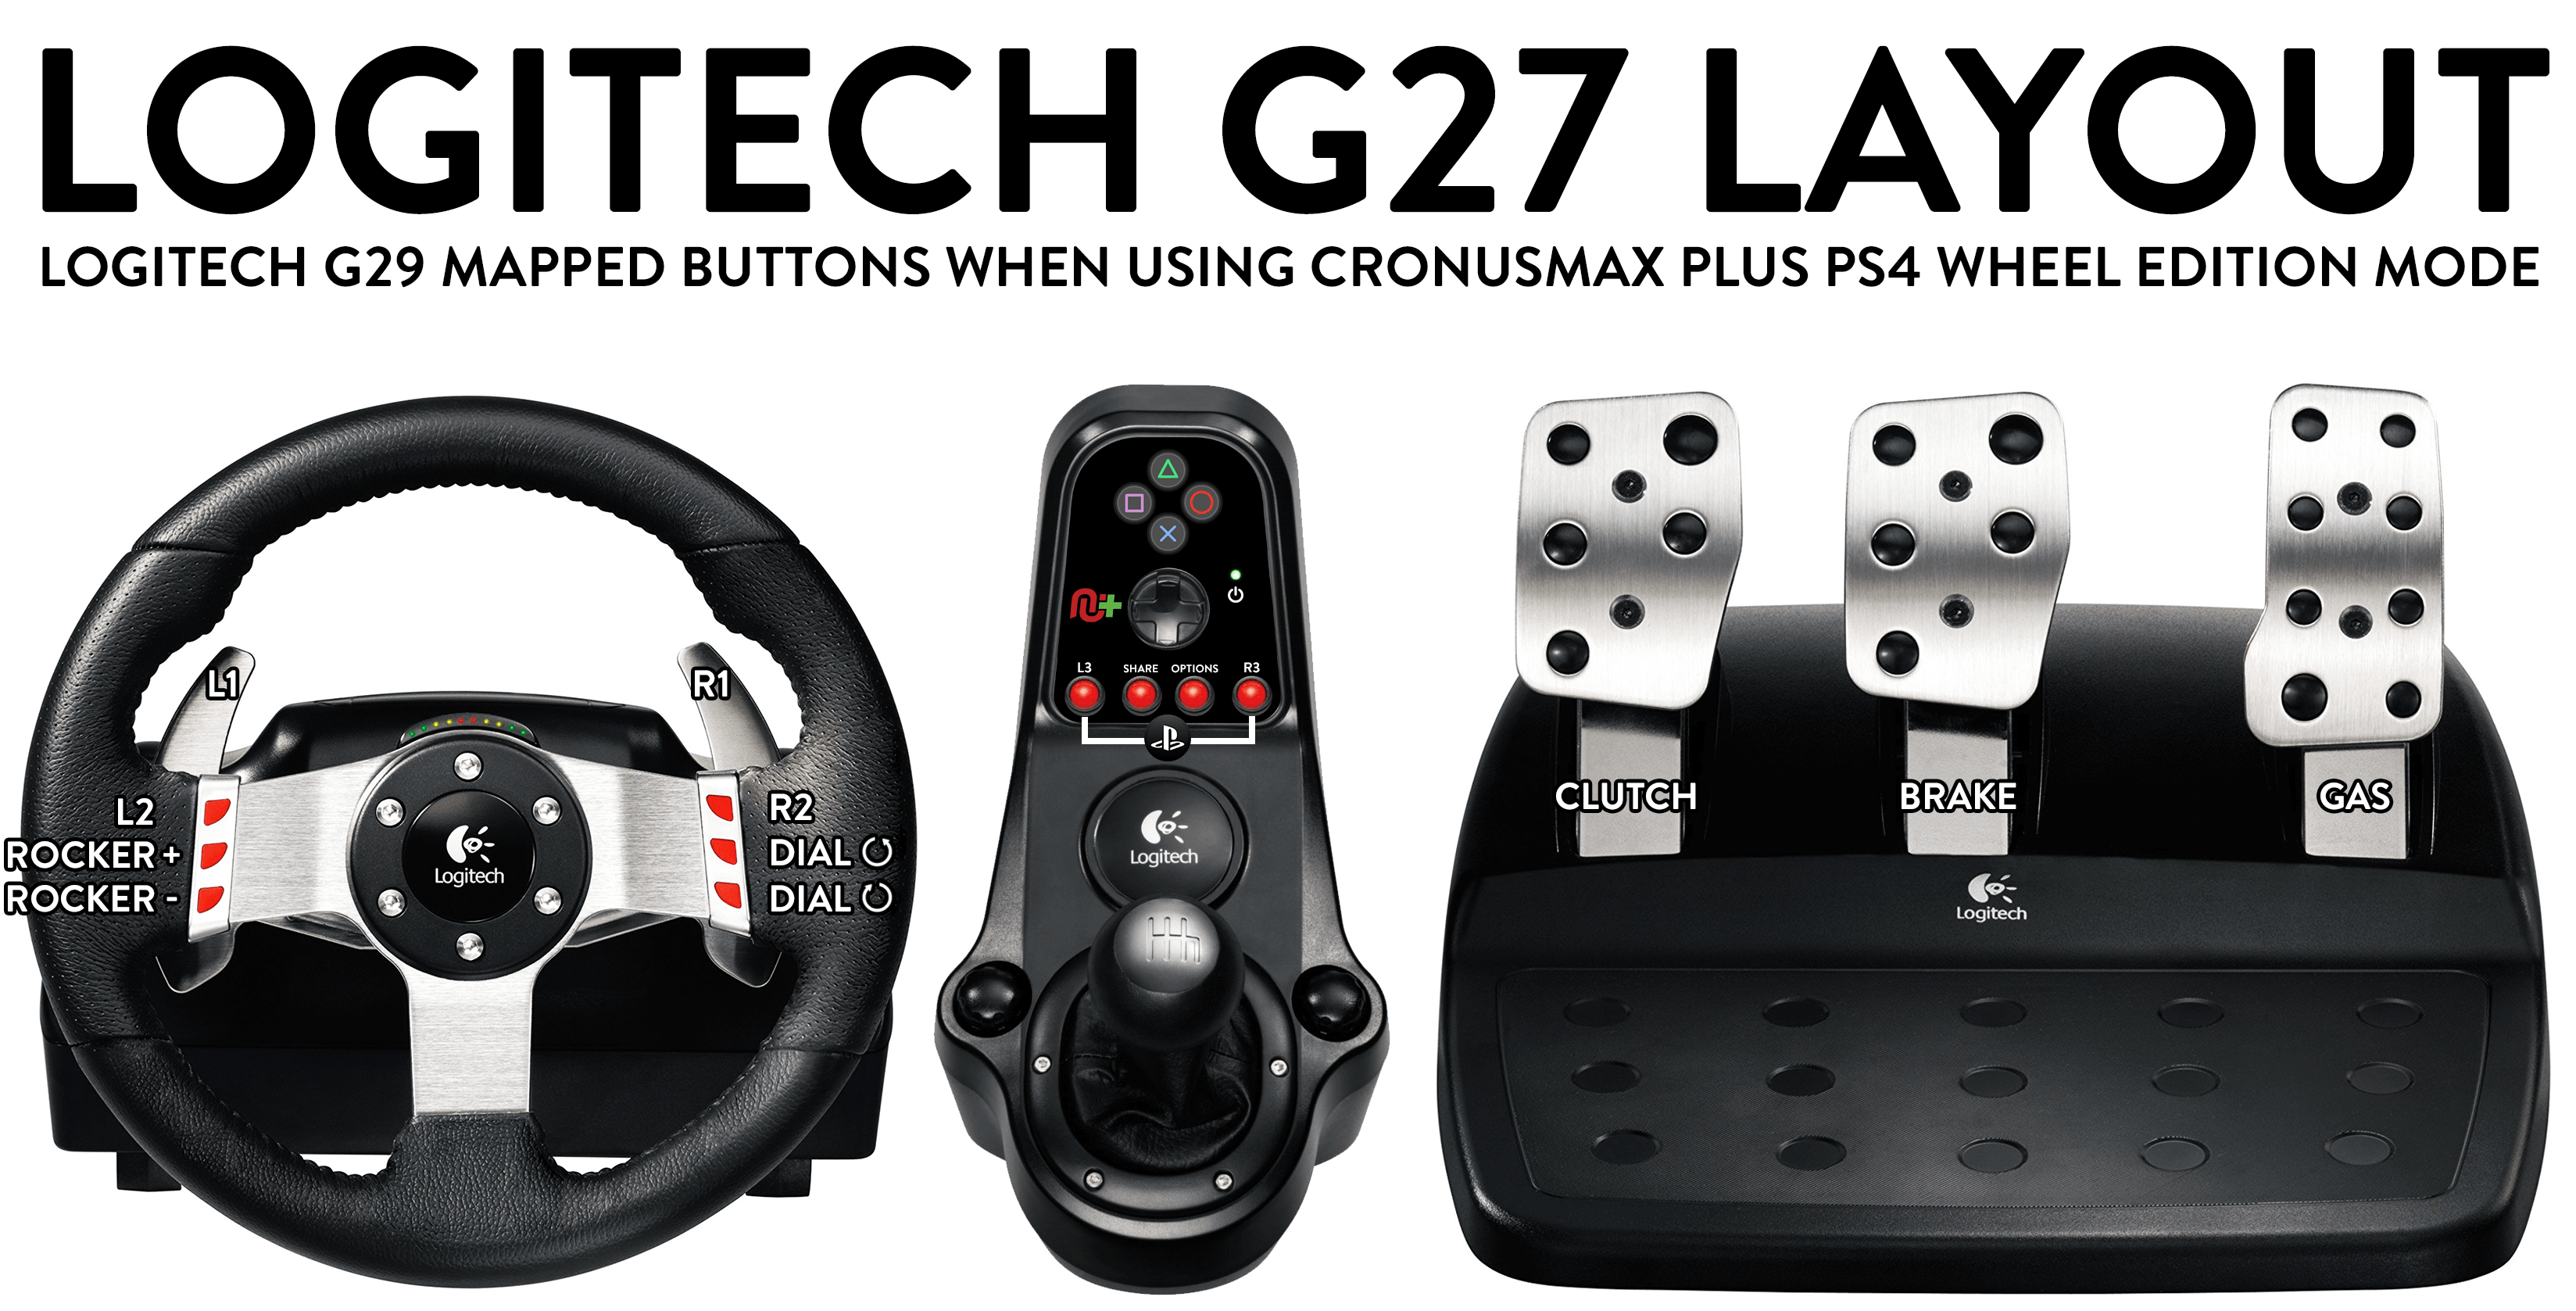 Logitech G27 Wheel on PS4 - saved by CronusMax Plus adapter